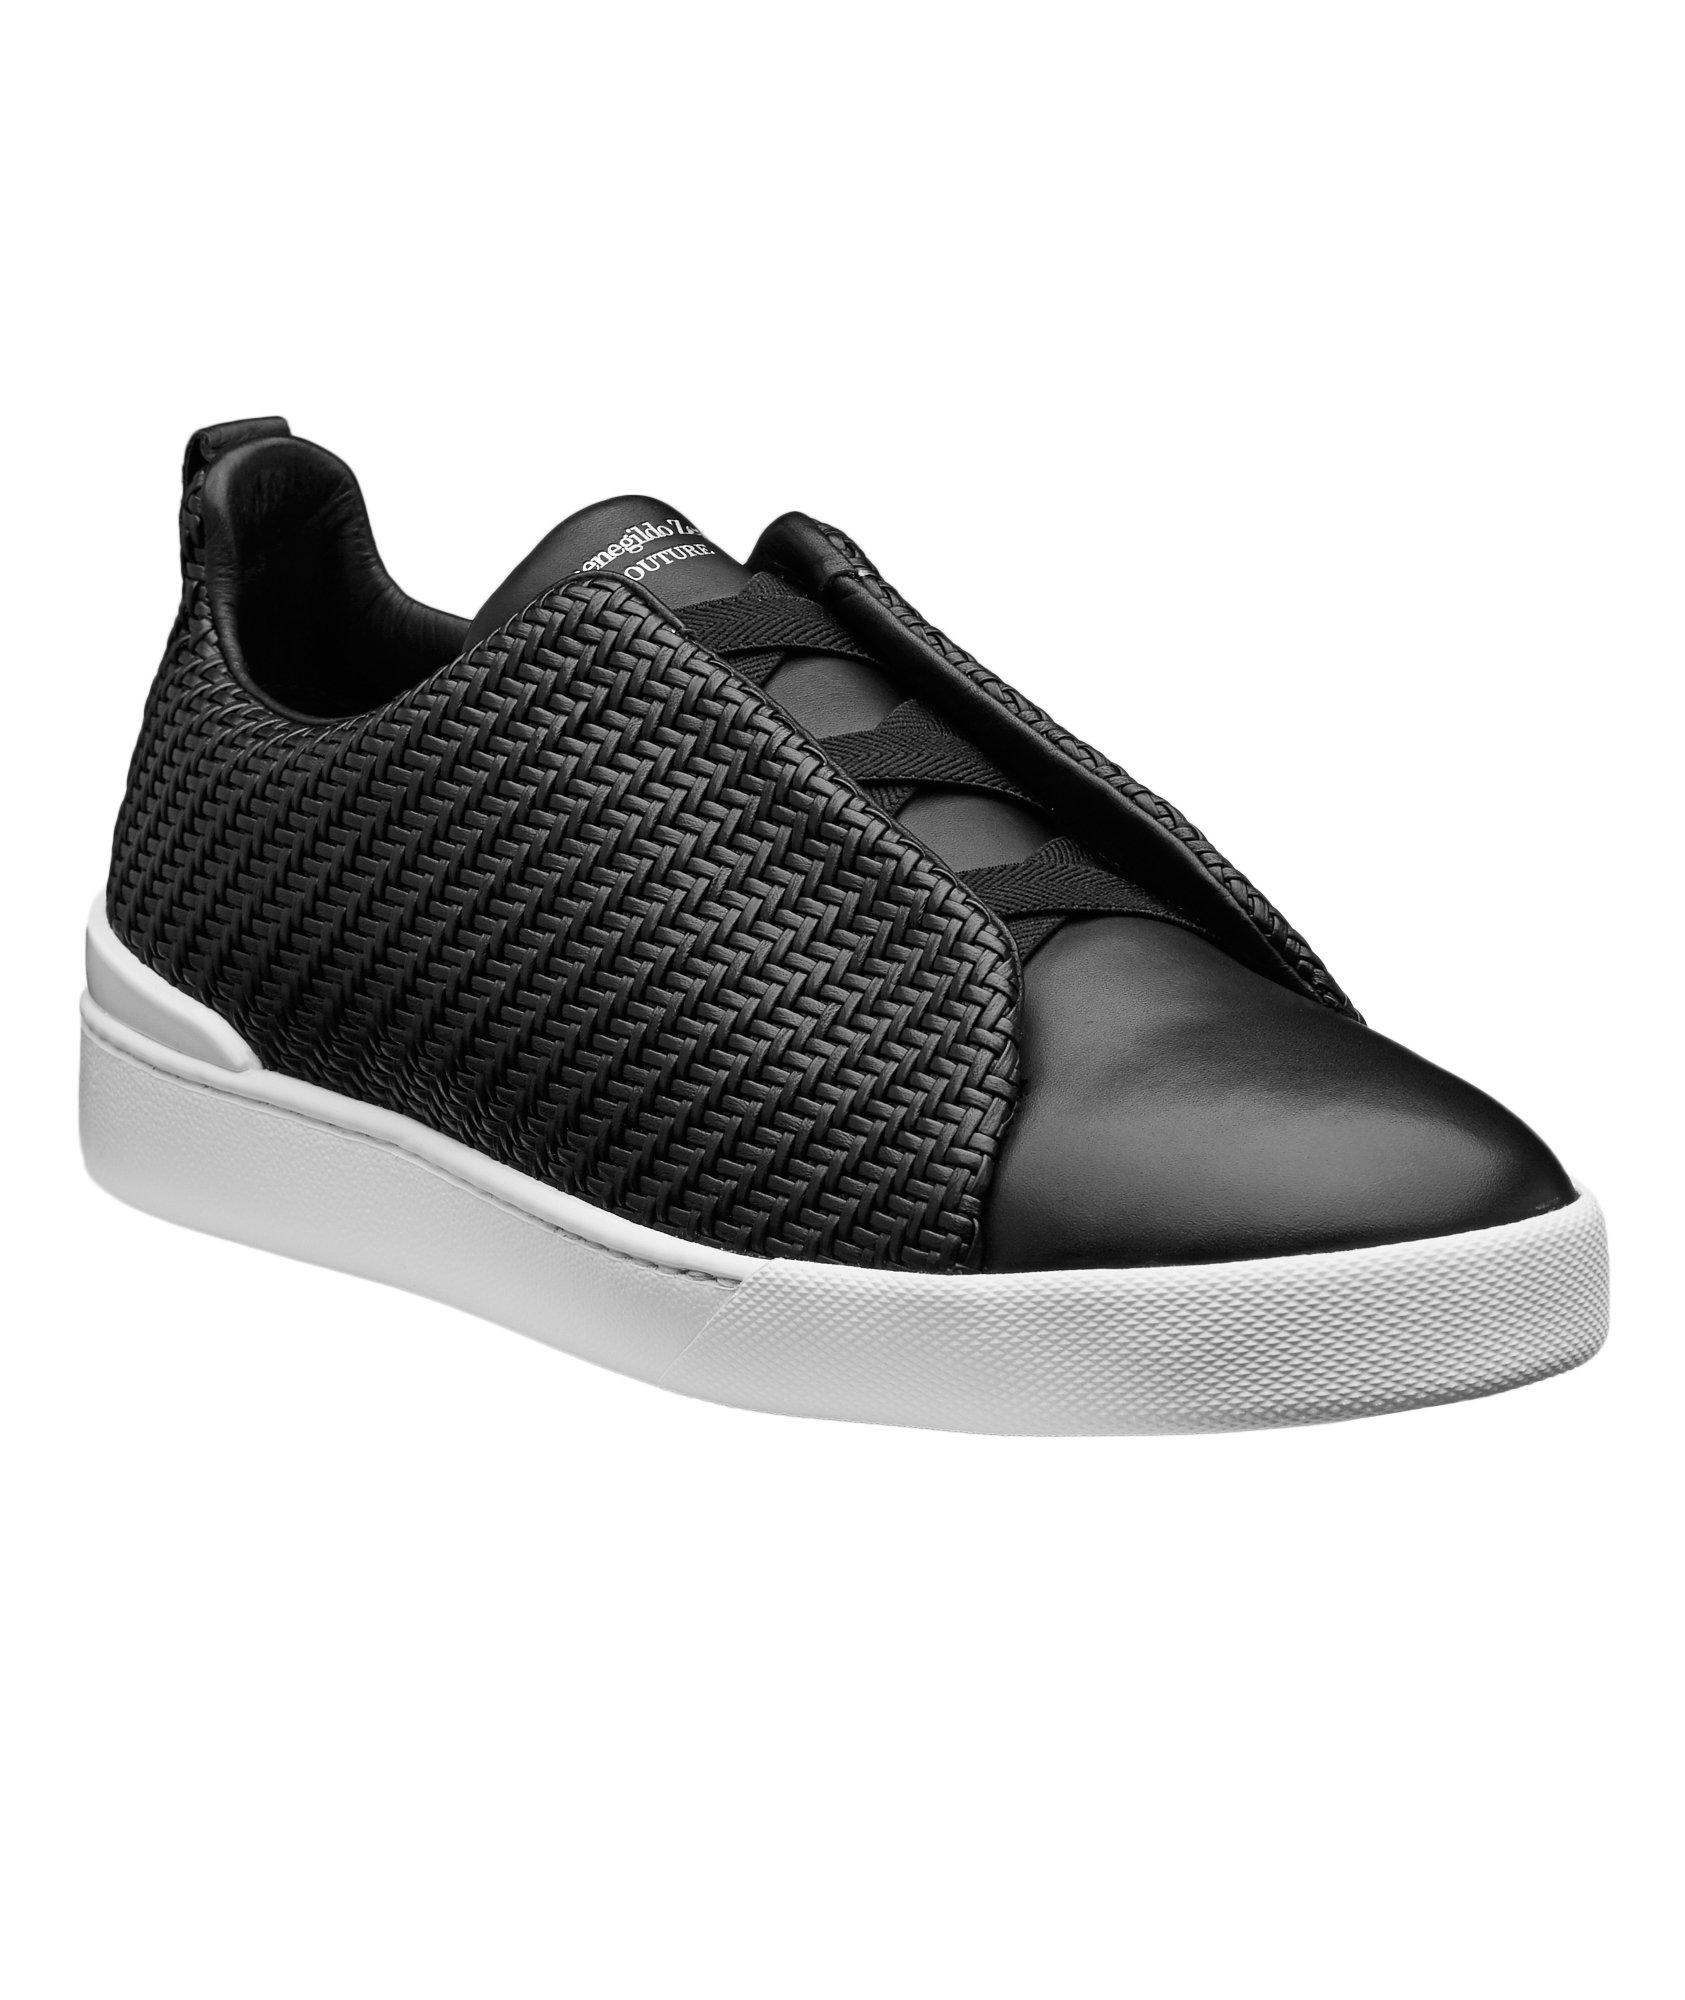 Woven Leather Slip-On Sneakers image 0